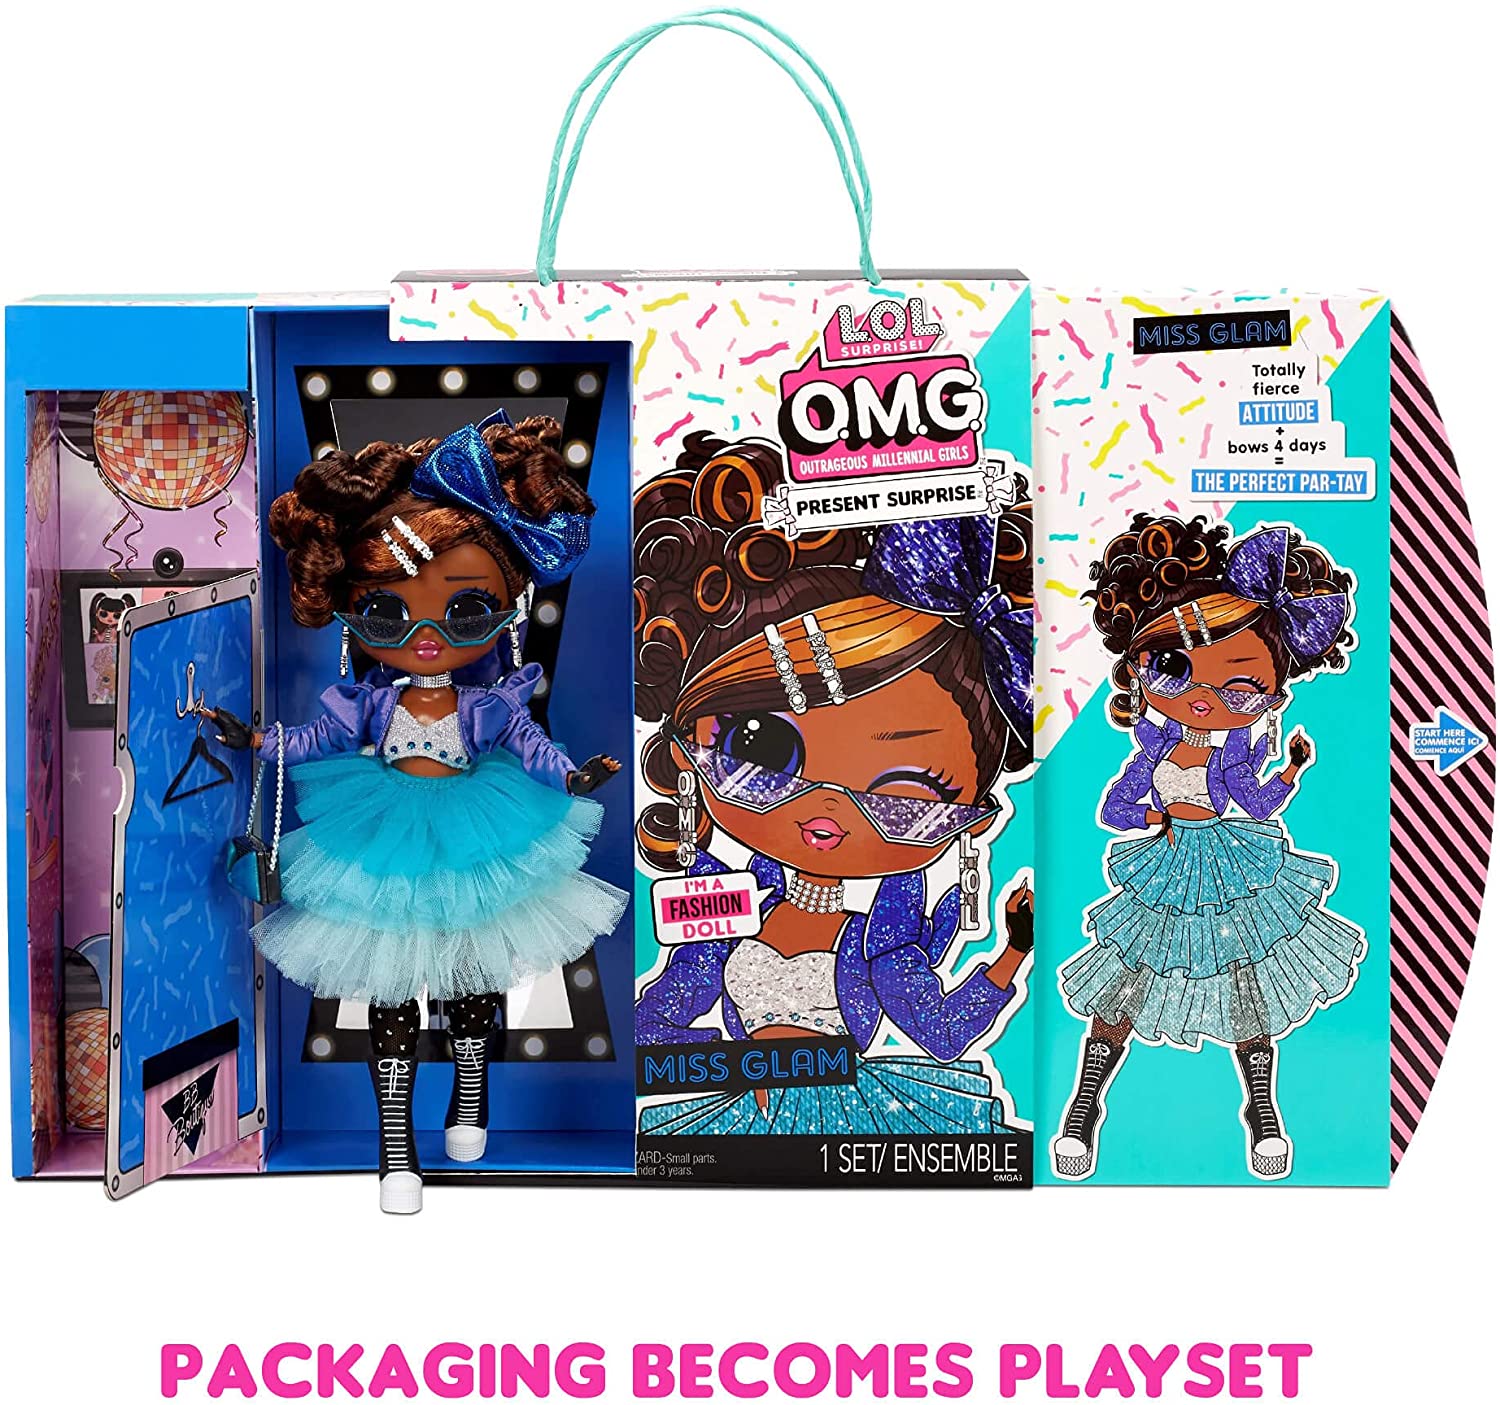 10" L.O.L. Surprise OMG Present Surprise Fashion Doll Miss Glam w/ 20 Surprises $13 + Free Shipping w/ Prime or on orders $25+